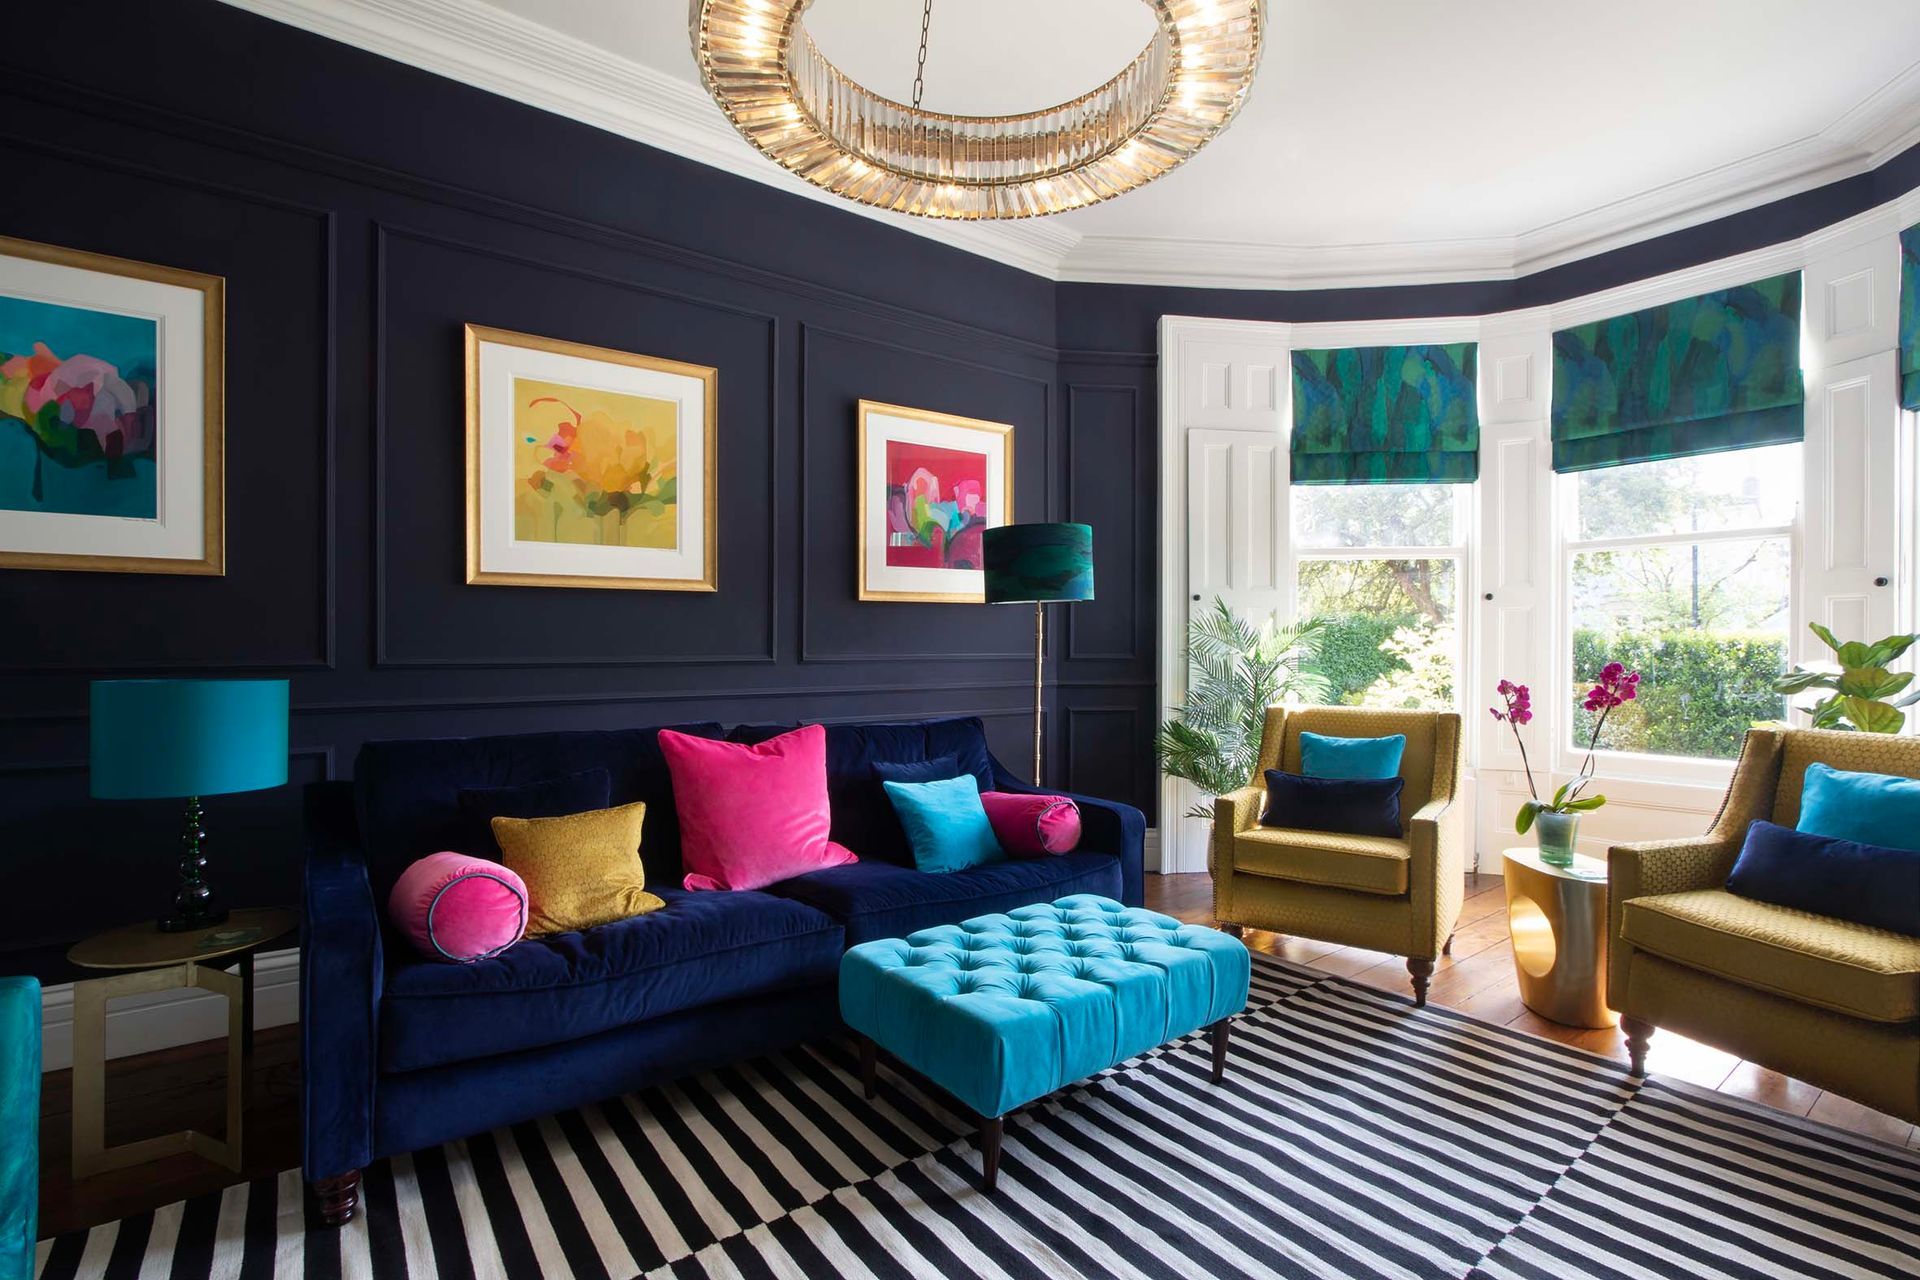 Colourful interior designed by K Interiors. Dark blues, teals, pinks and yellows.